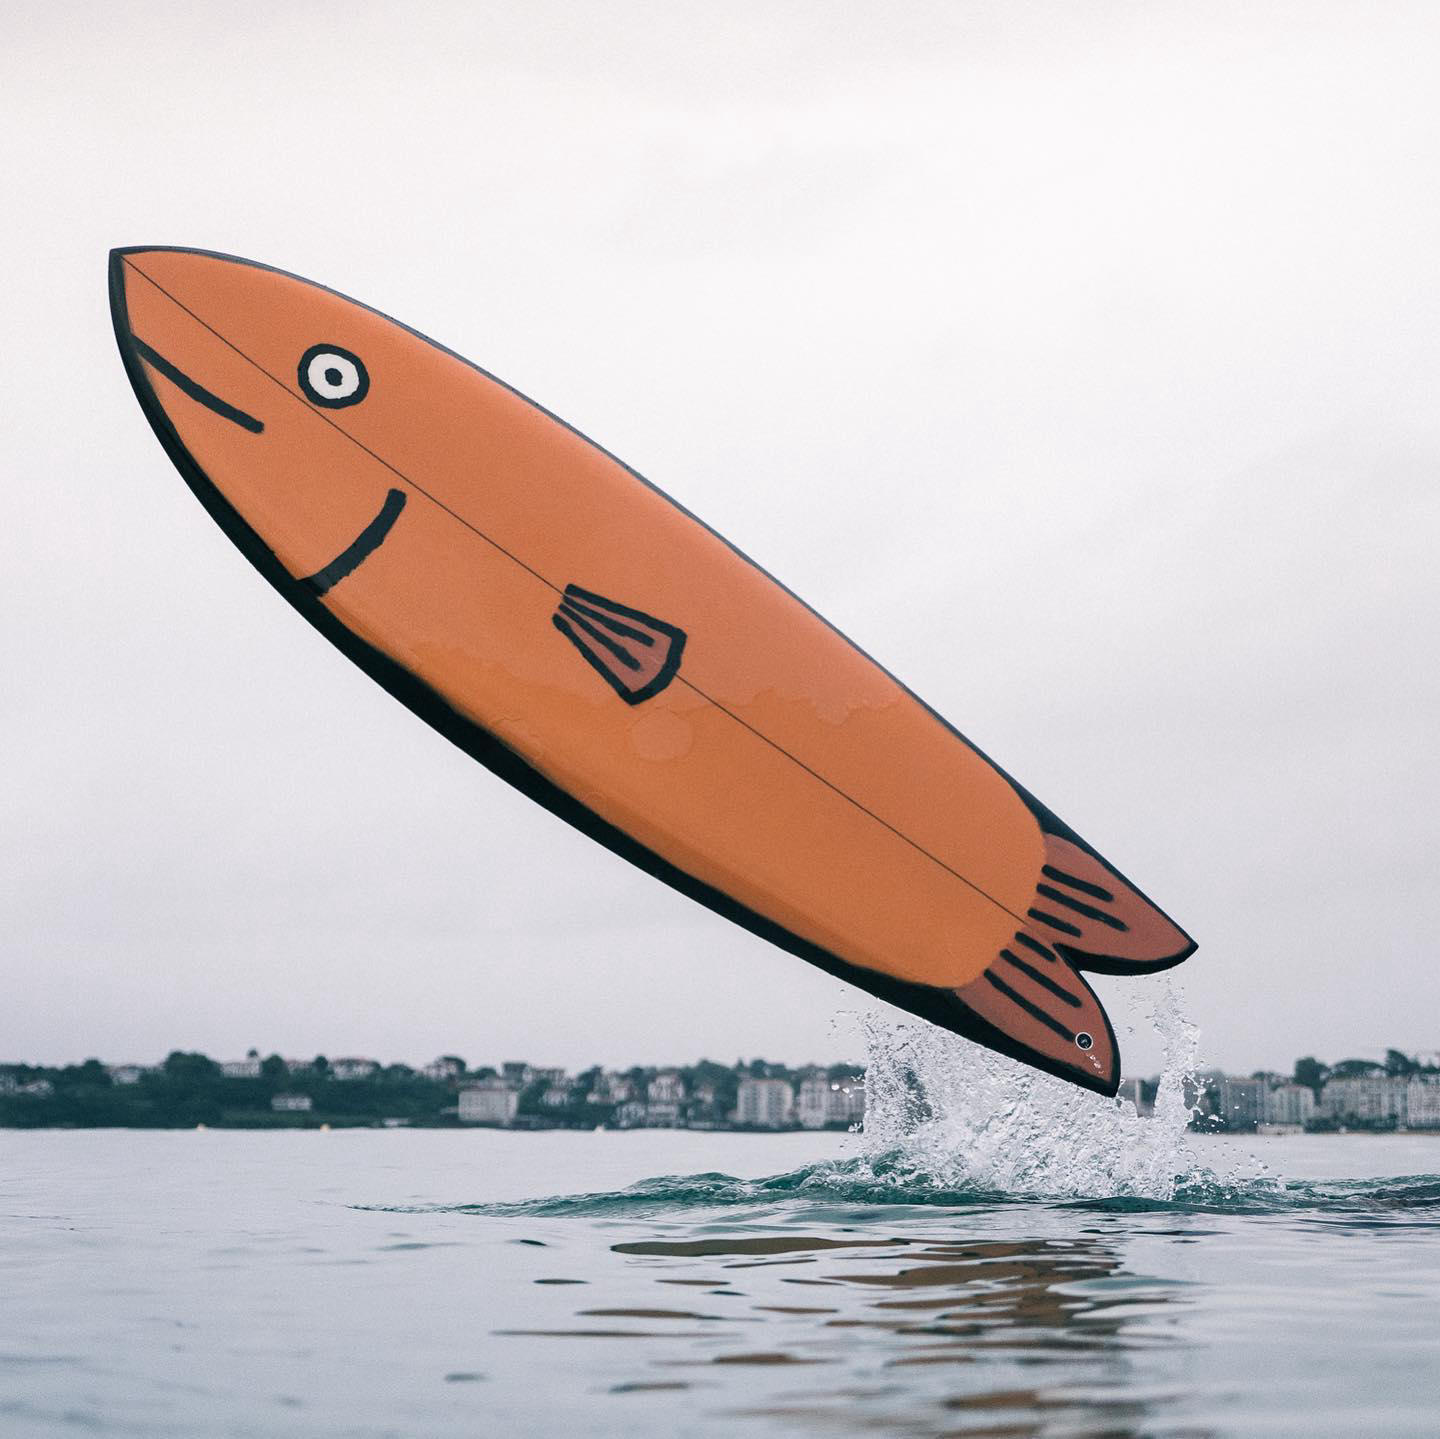 Jean Jullien - Super happy to present the four surfboards I’ve done with #fernandsurfboards